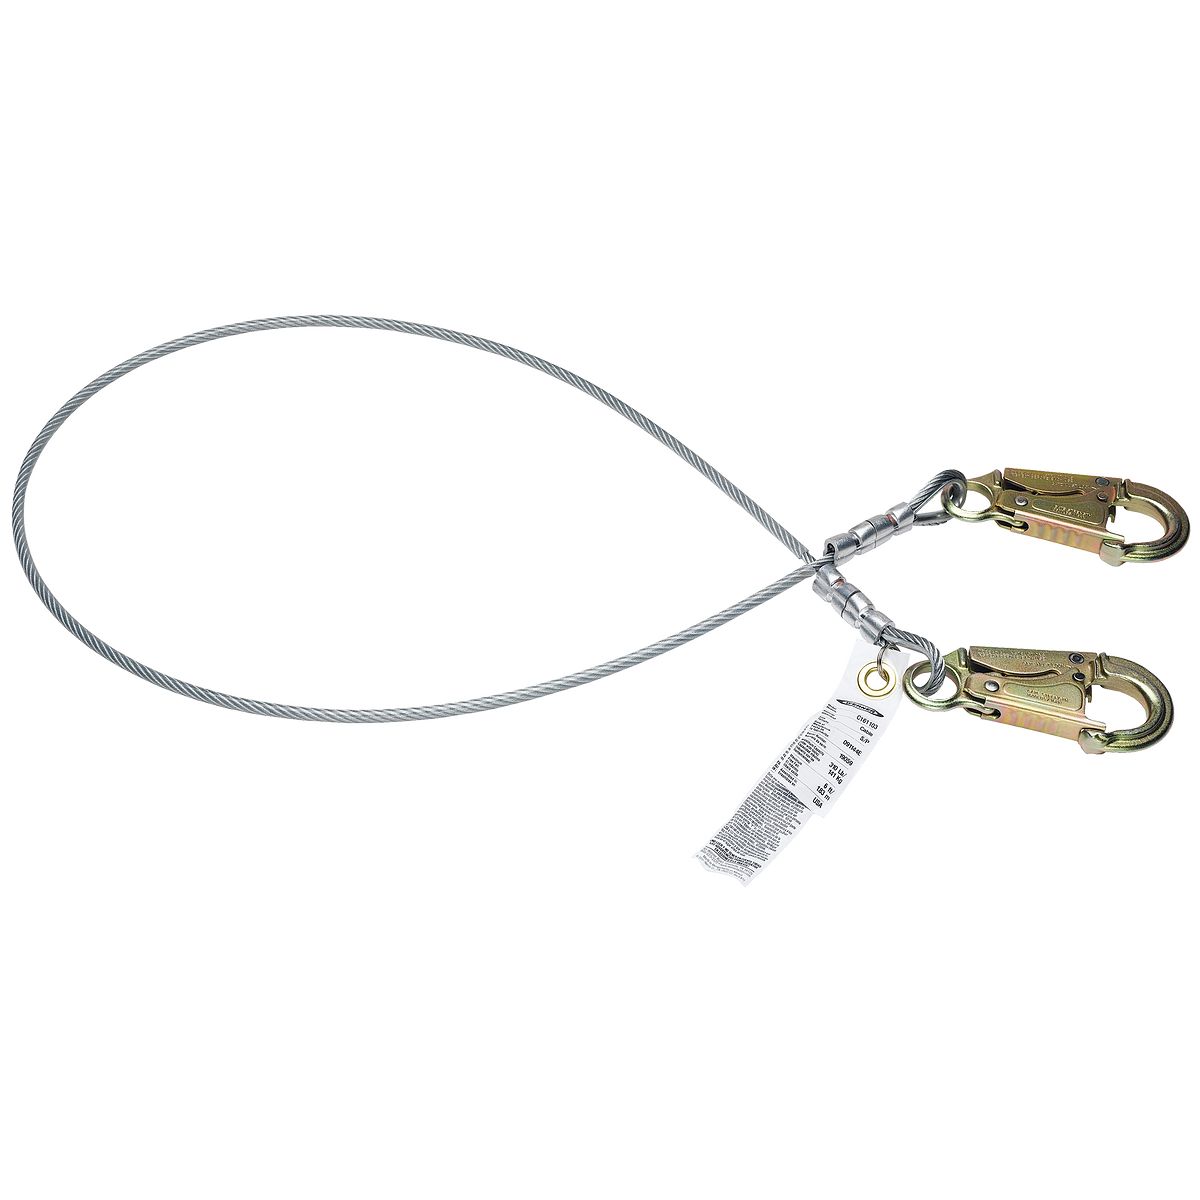 American Ladders & Scaffolds, Positioning Lanyard (1/4" Vinyl Cable, Snaphooks) - 2'